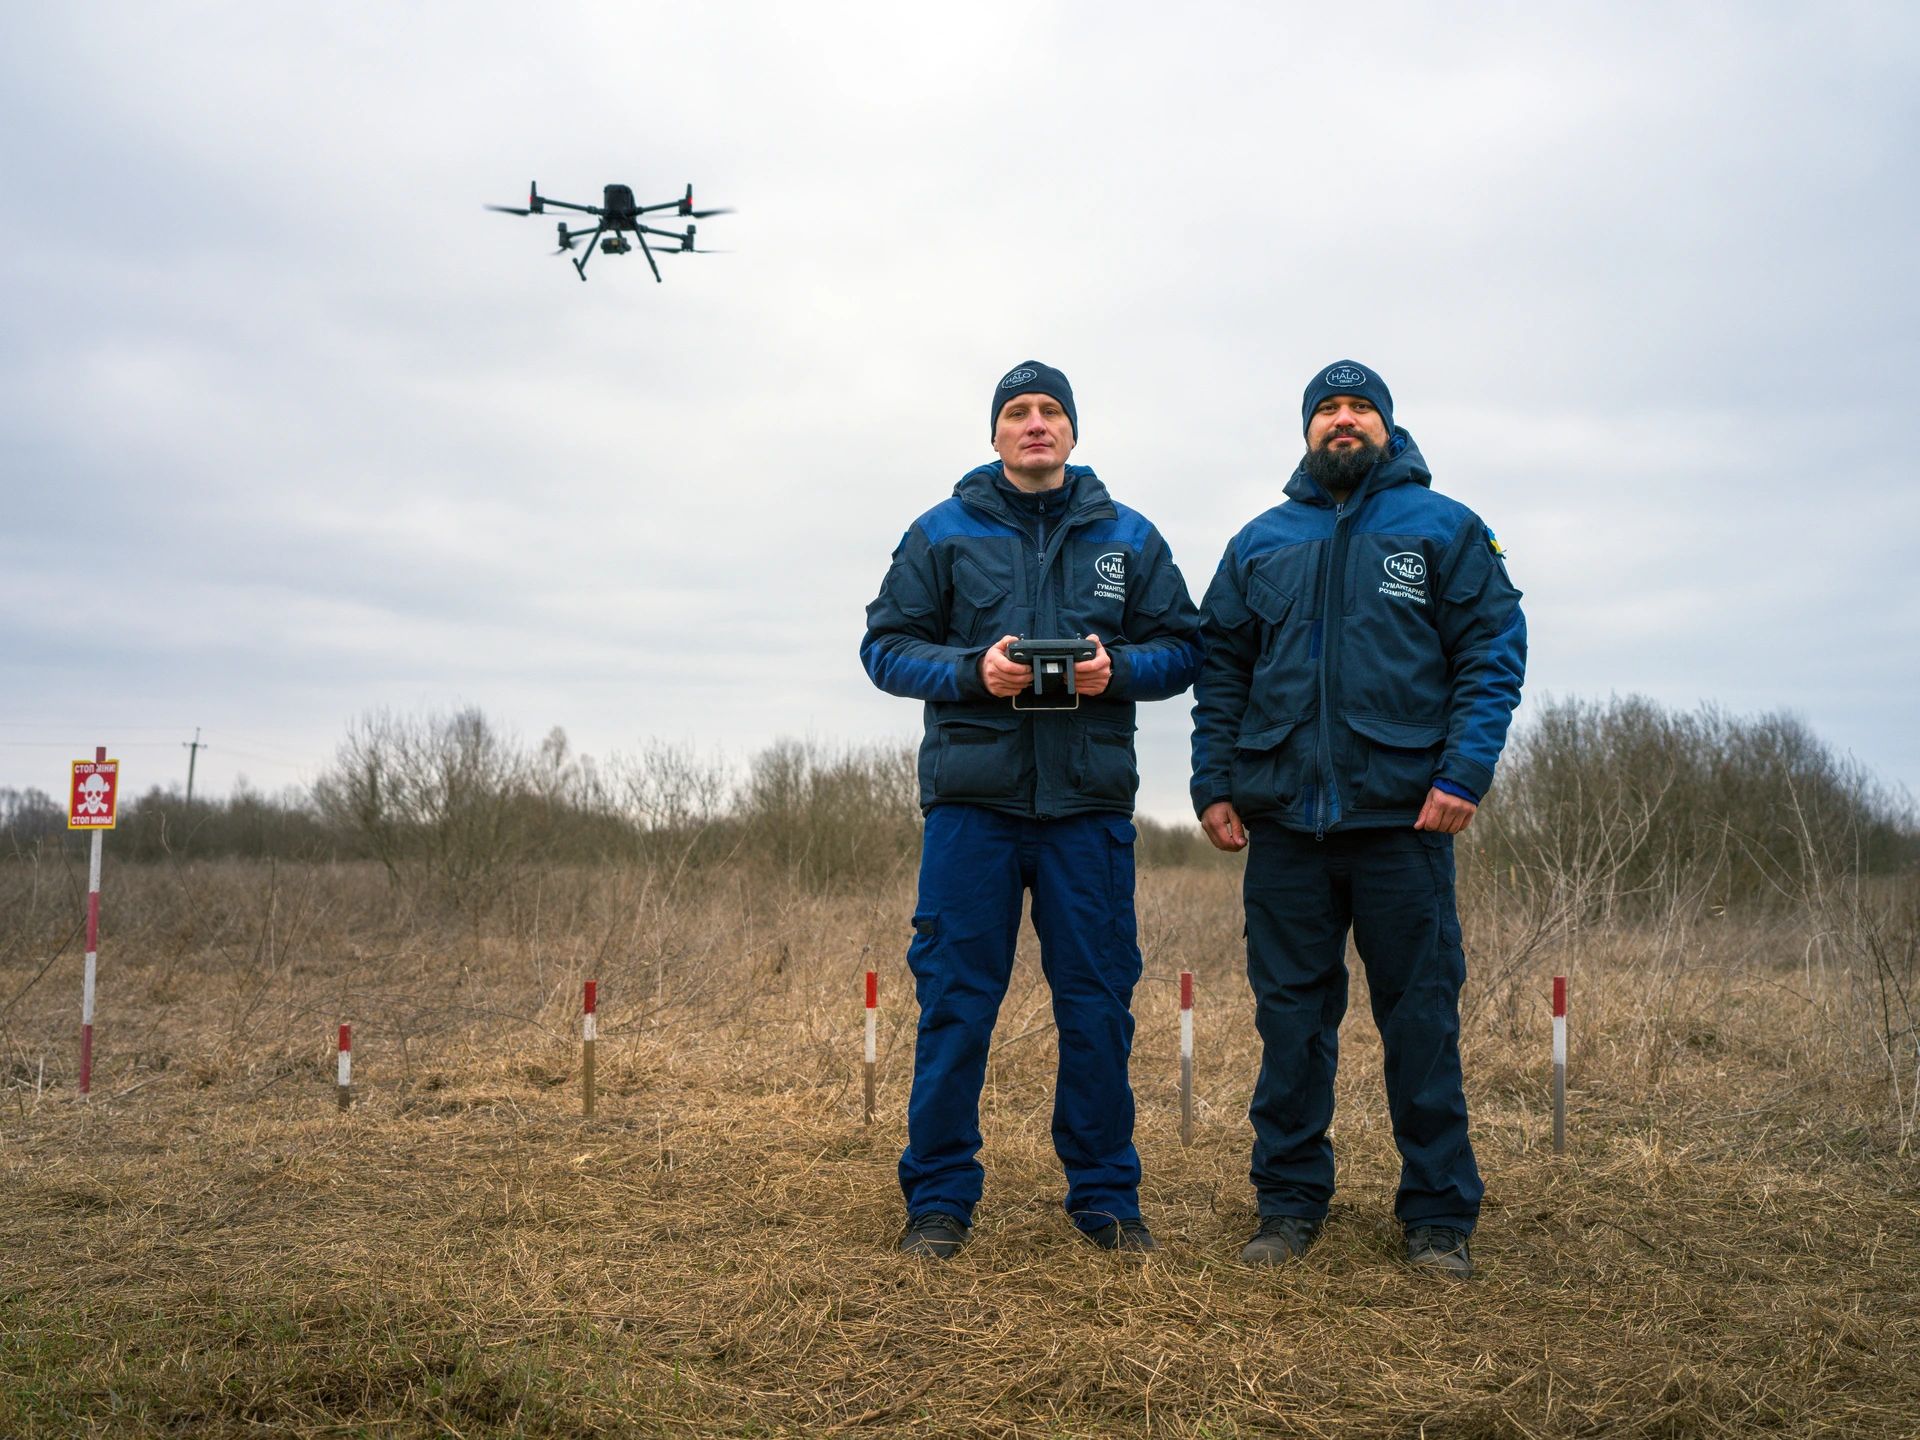 Two men are standing outside, on a patch of brown scrubland with bushes in the background, under a dull, cloudy sky. Behind them is an area marked off with red and white painted posts, and a white and red "Danger: Mines" sign with a skull and crossbones. To the right of the men a small, quadcopter drone hovers in the sky, just over head-height. Both men are wearing matching, blue waterproof trousers and jackets, and dark blue woolly hats. The man on the left, Serhii Pasholok, is clean-shaven and holding a drone control unit. Next to him is Selim Granqvist-Ahmed, who has a black beard. Granqvist-Ahmed, who is 38, is a Research and Development Manager of the HALO Trust mine-clearing organization.